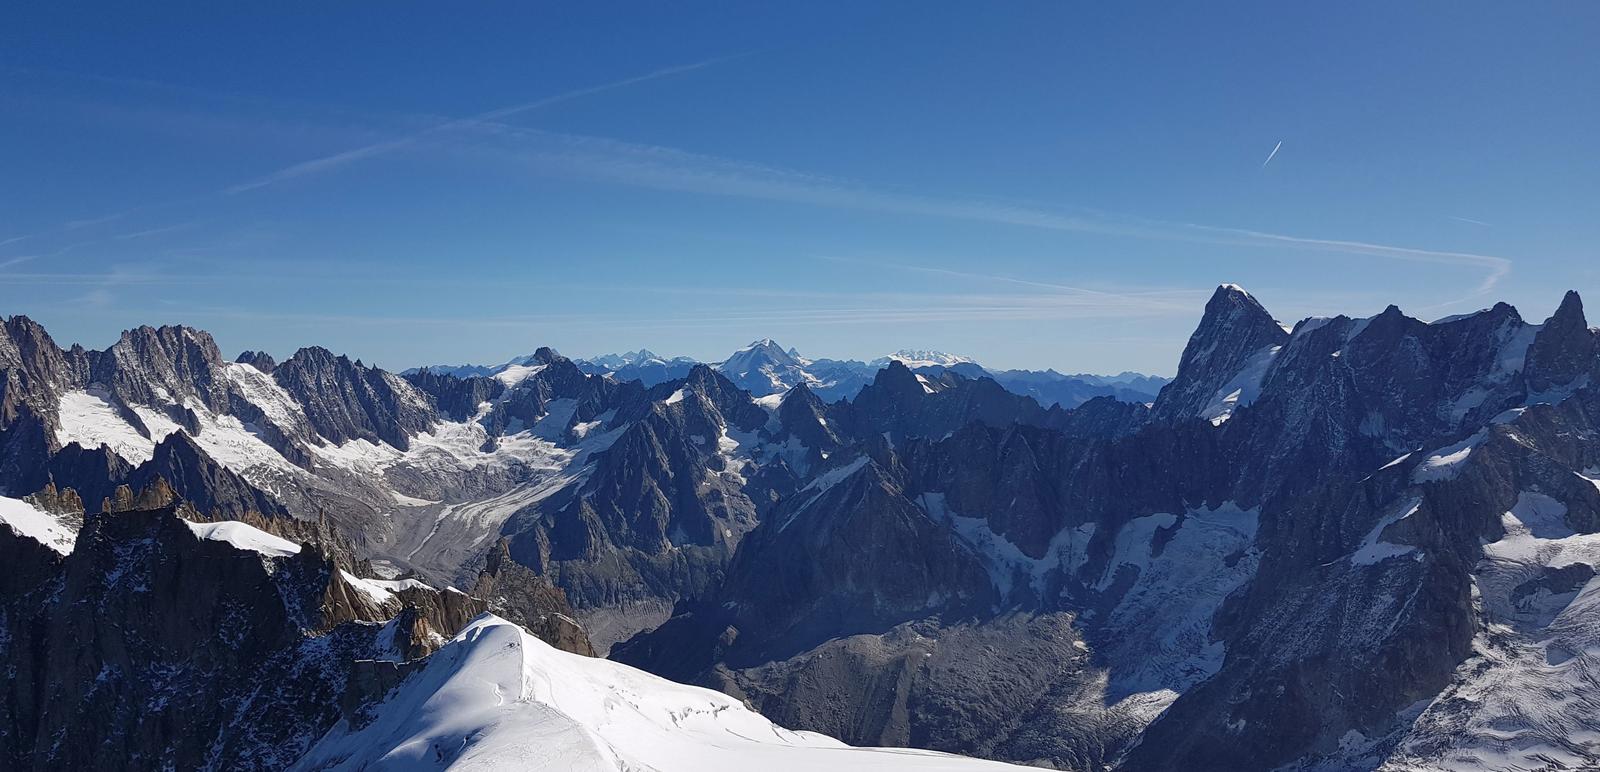 First Terrace at Aiguille